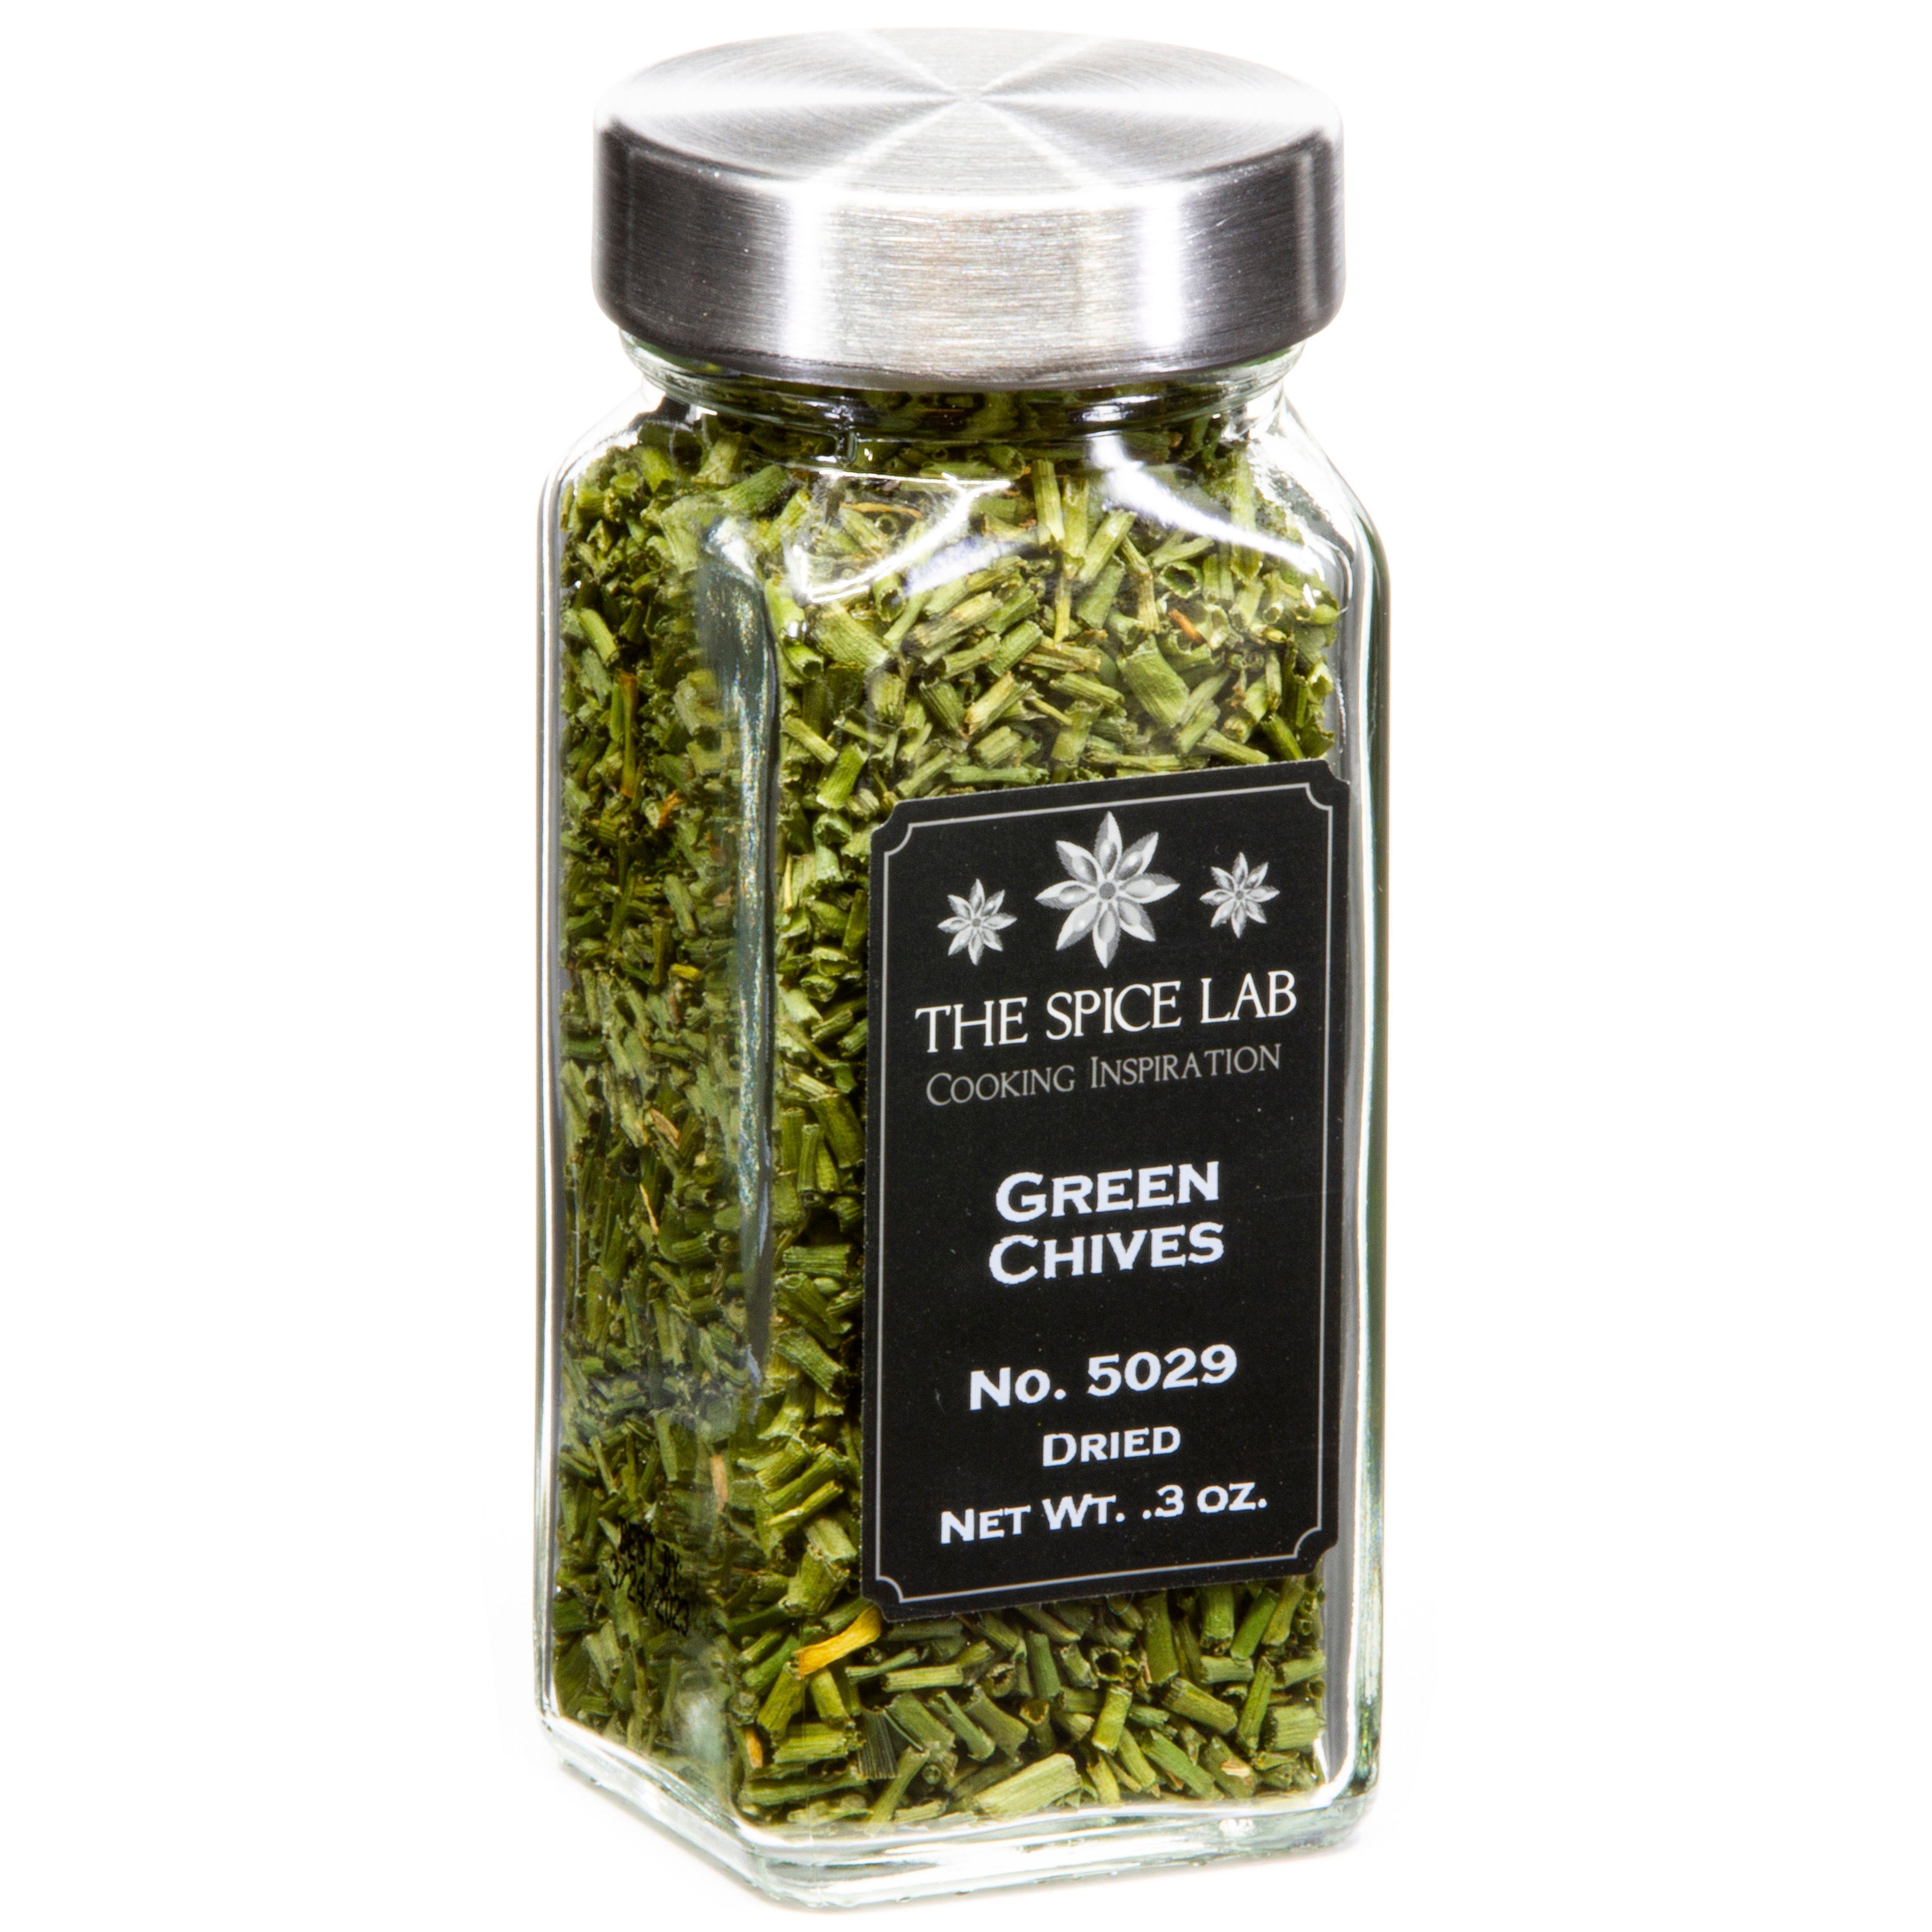 The Spice Lab Dried Green Chives / Dehydrated Green Onion - Kosher Non